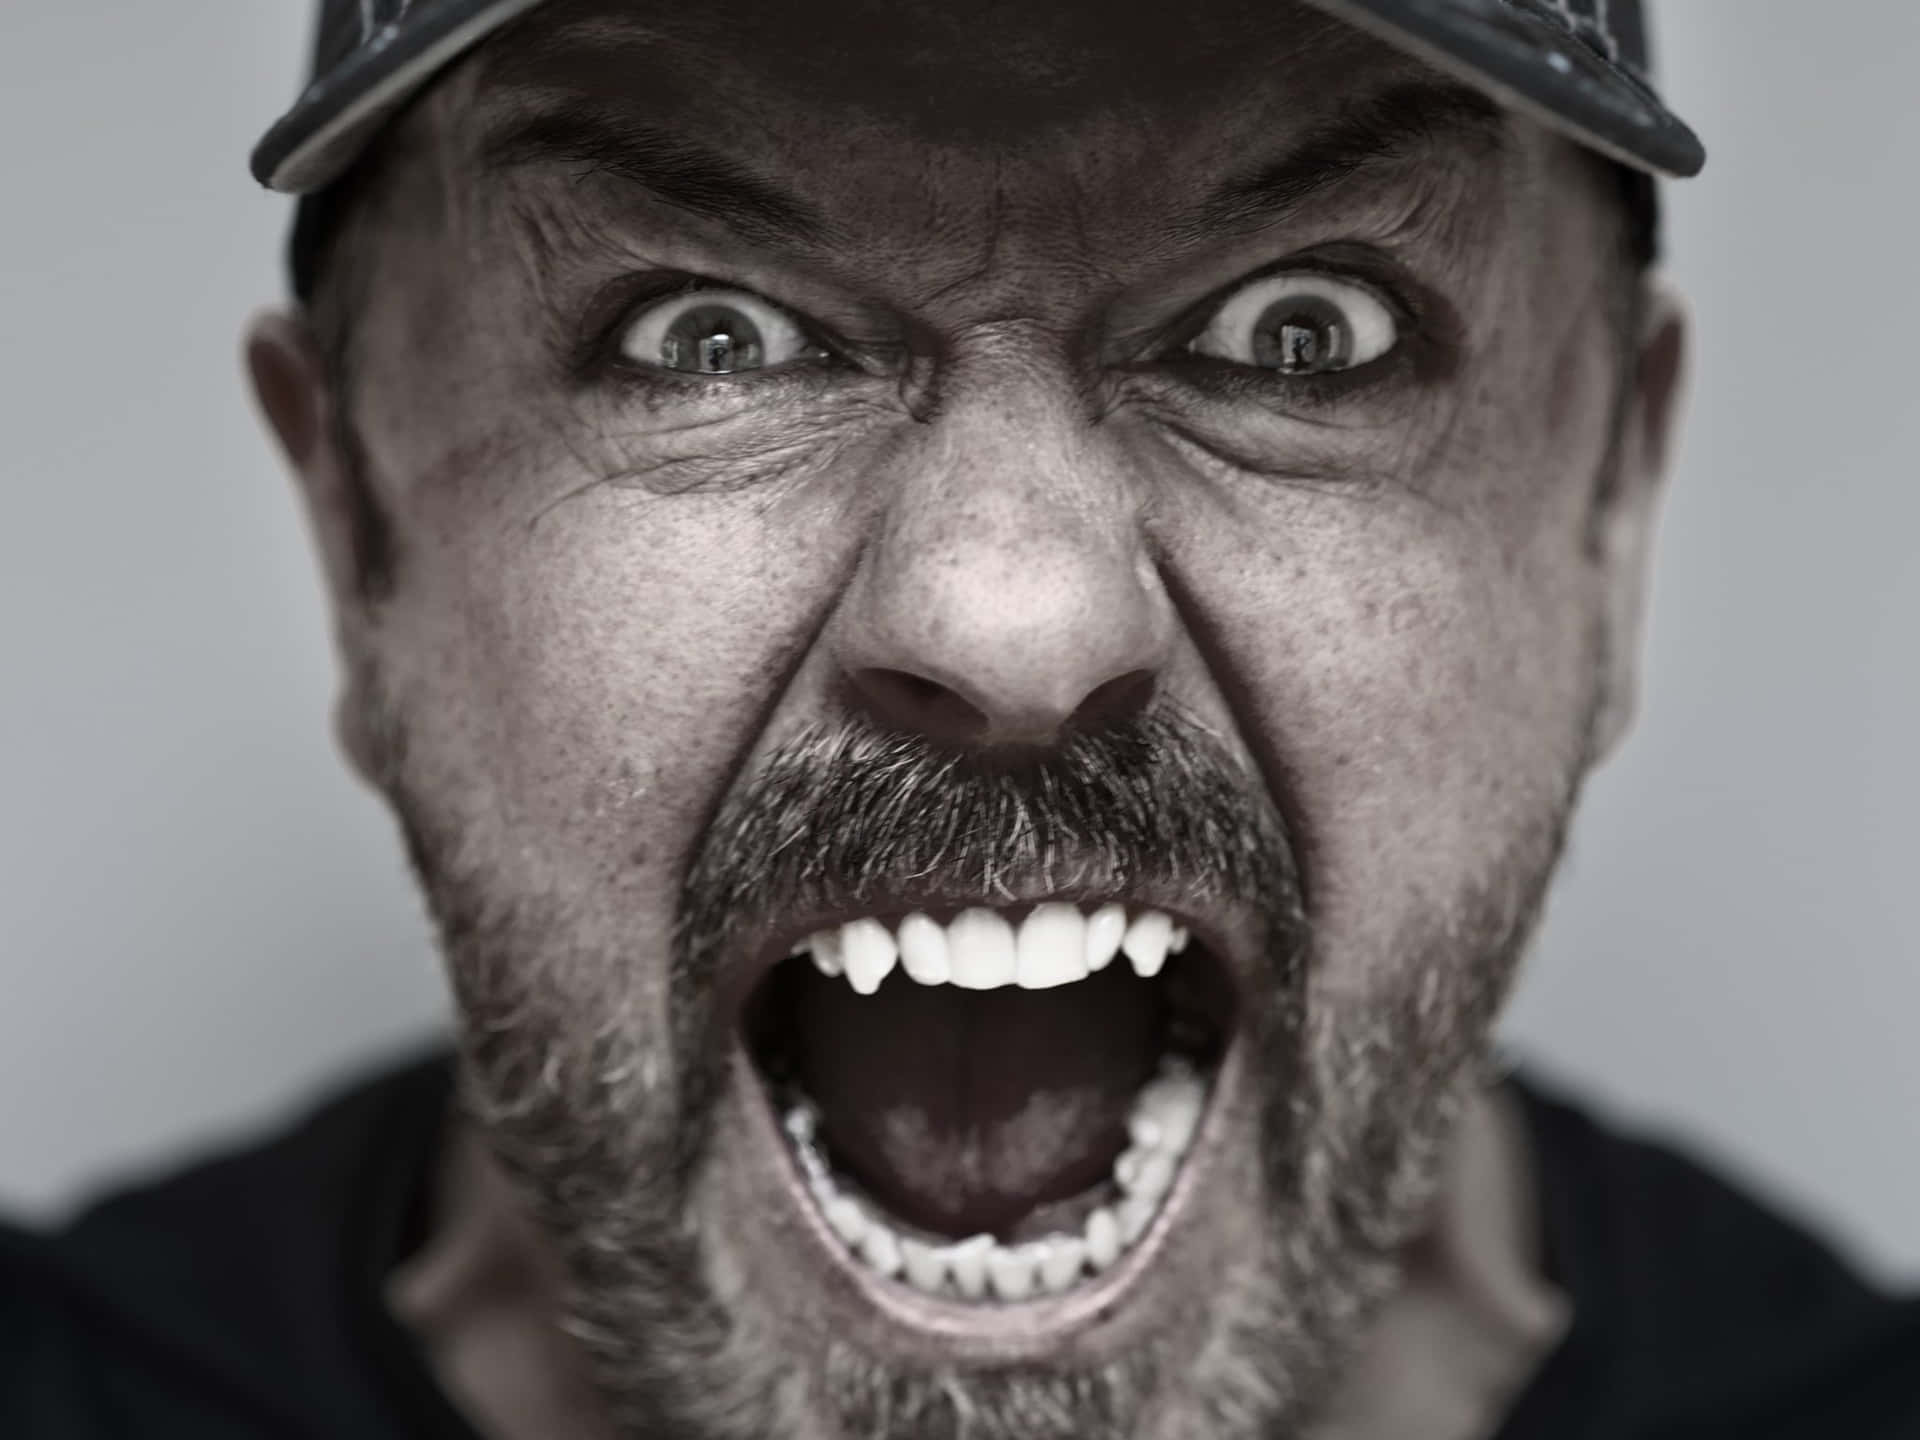 Award-winning comedian Ricky Gervais in a classic pose Wallpaper